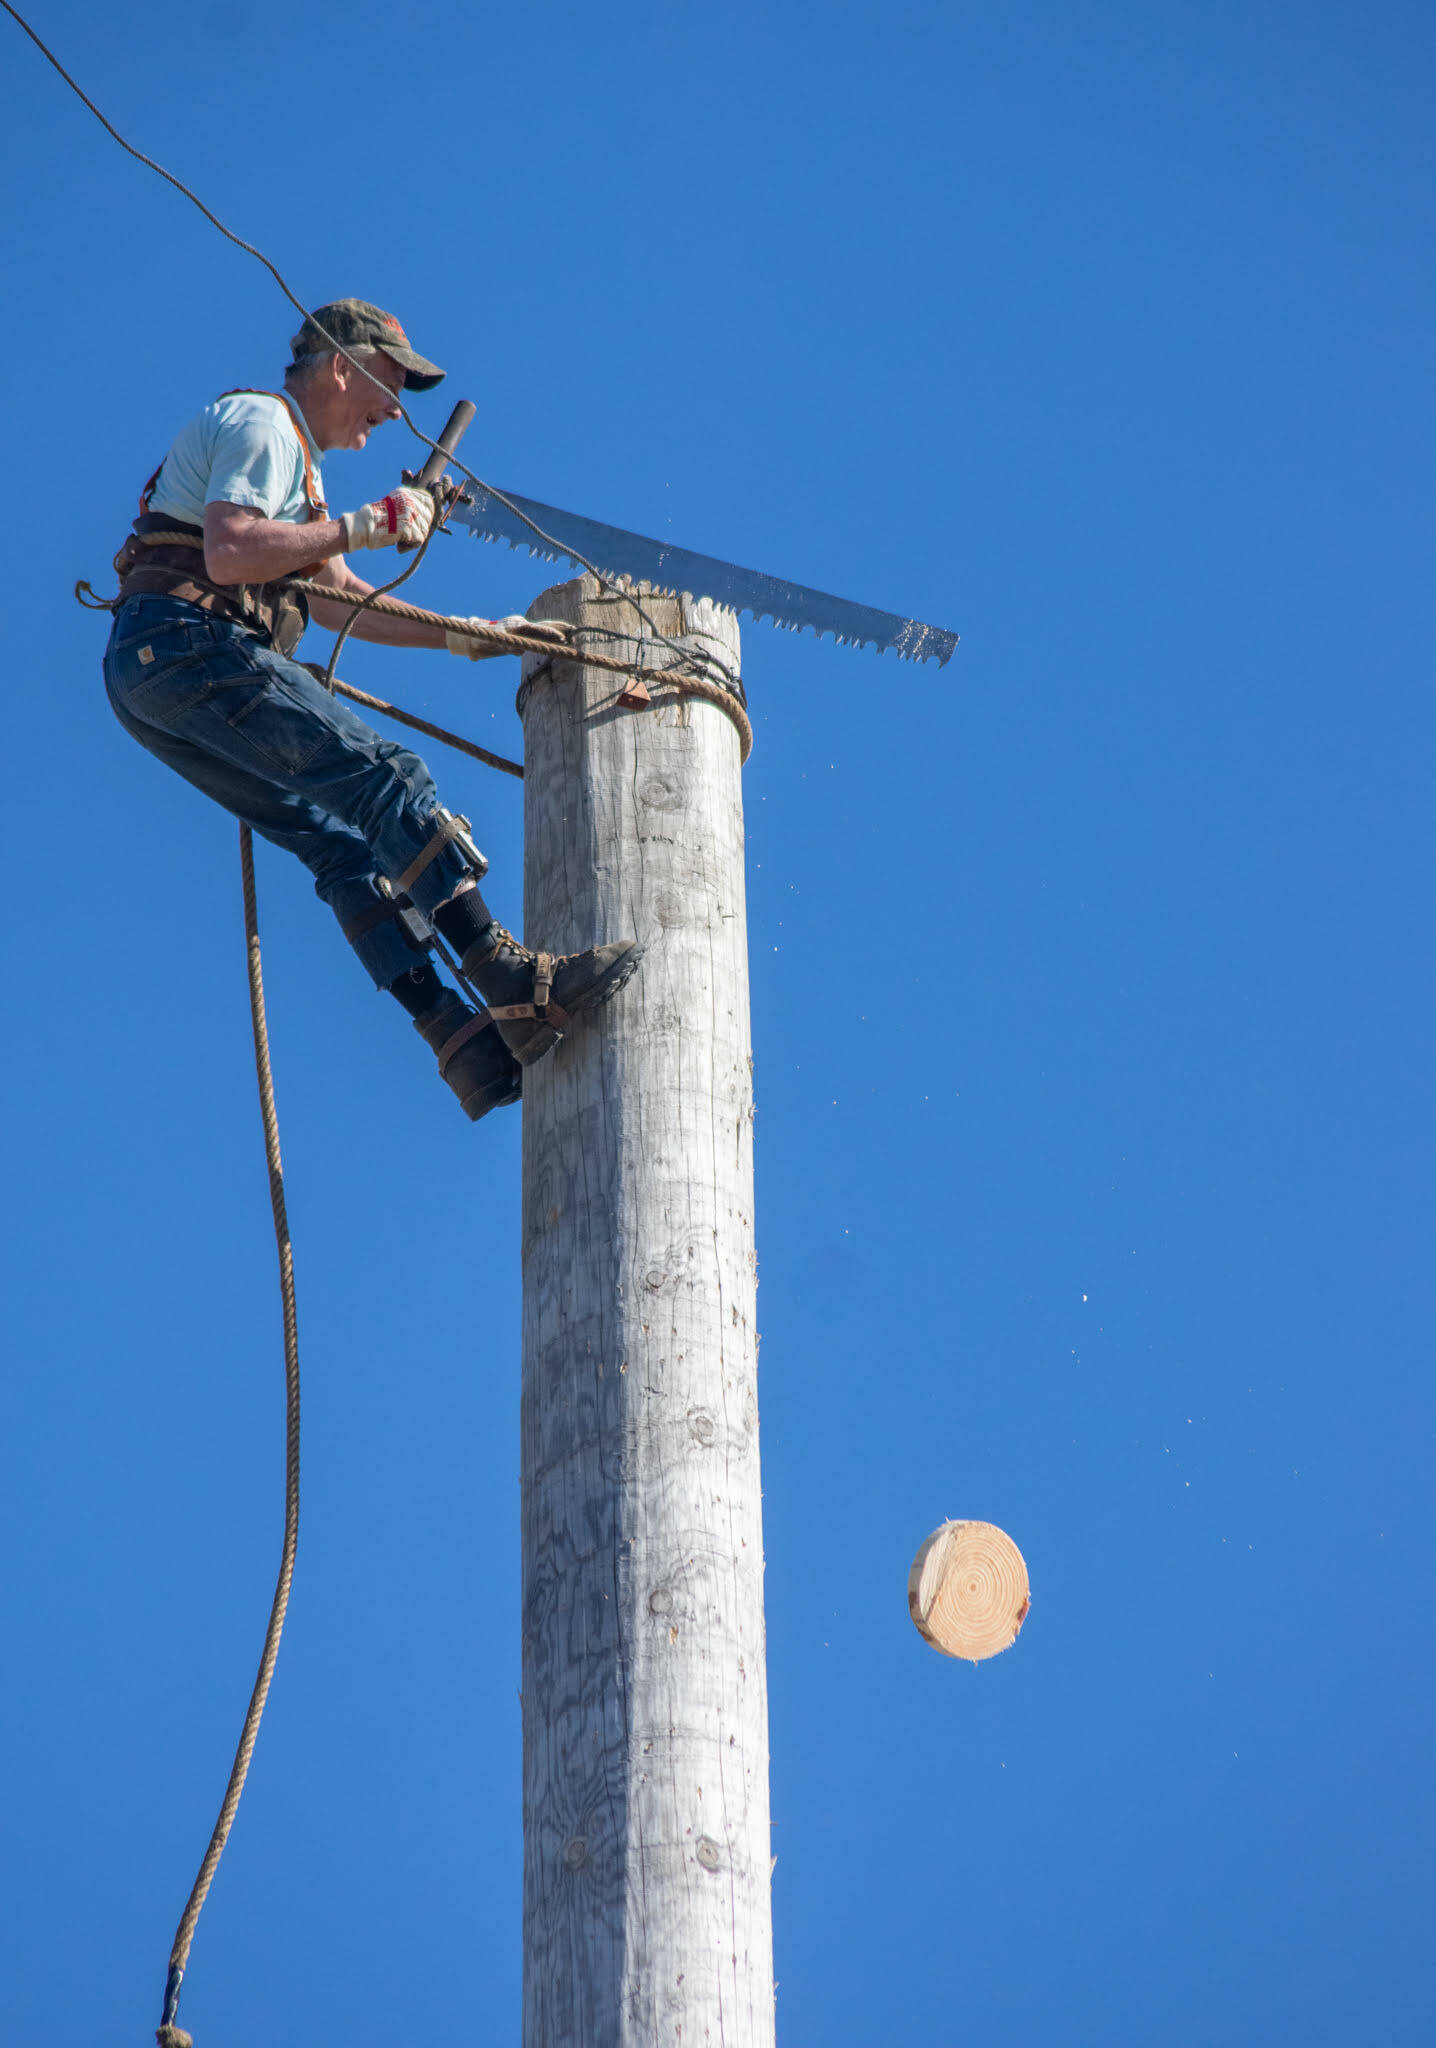 Sequim Gazette photo by Emily Matthiessen
Tony Kaszycki, 68, of Graham, is a crowd favorite for his agility and speed as he climbs what was described as about a 90-foot high pole and saws a round of wood at the Sequim Irrigation Festival Logging Show last week.